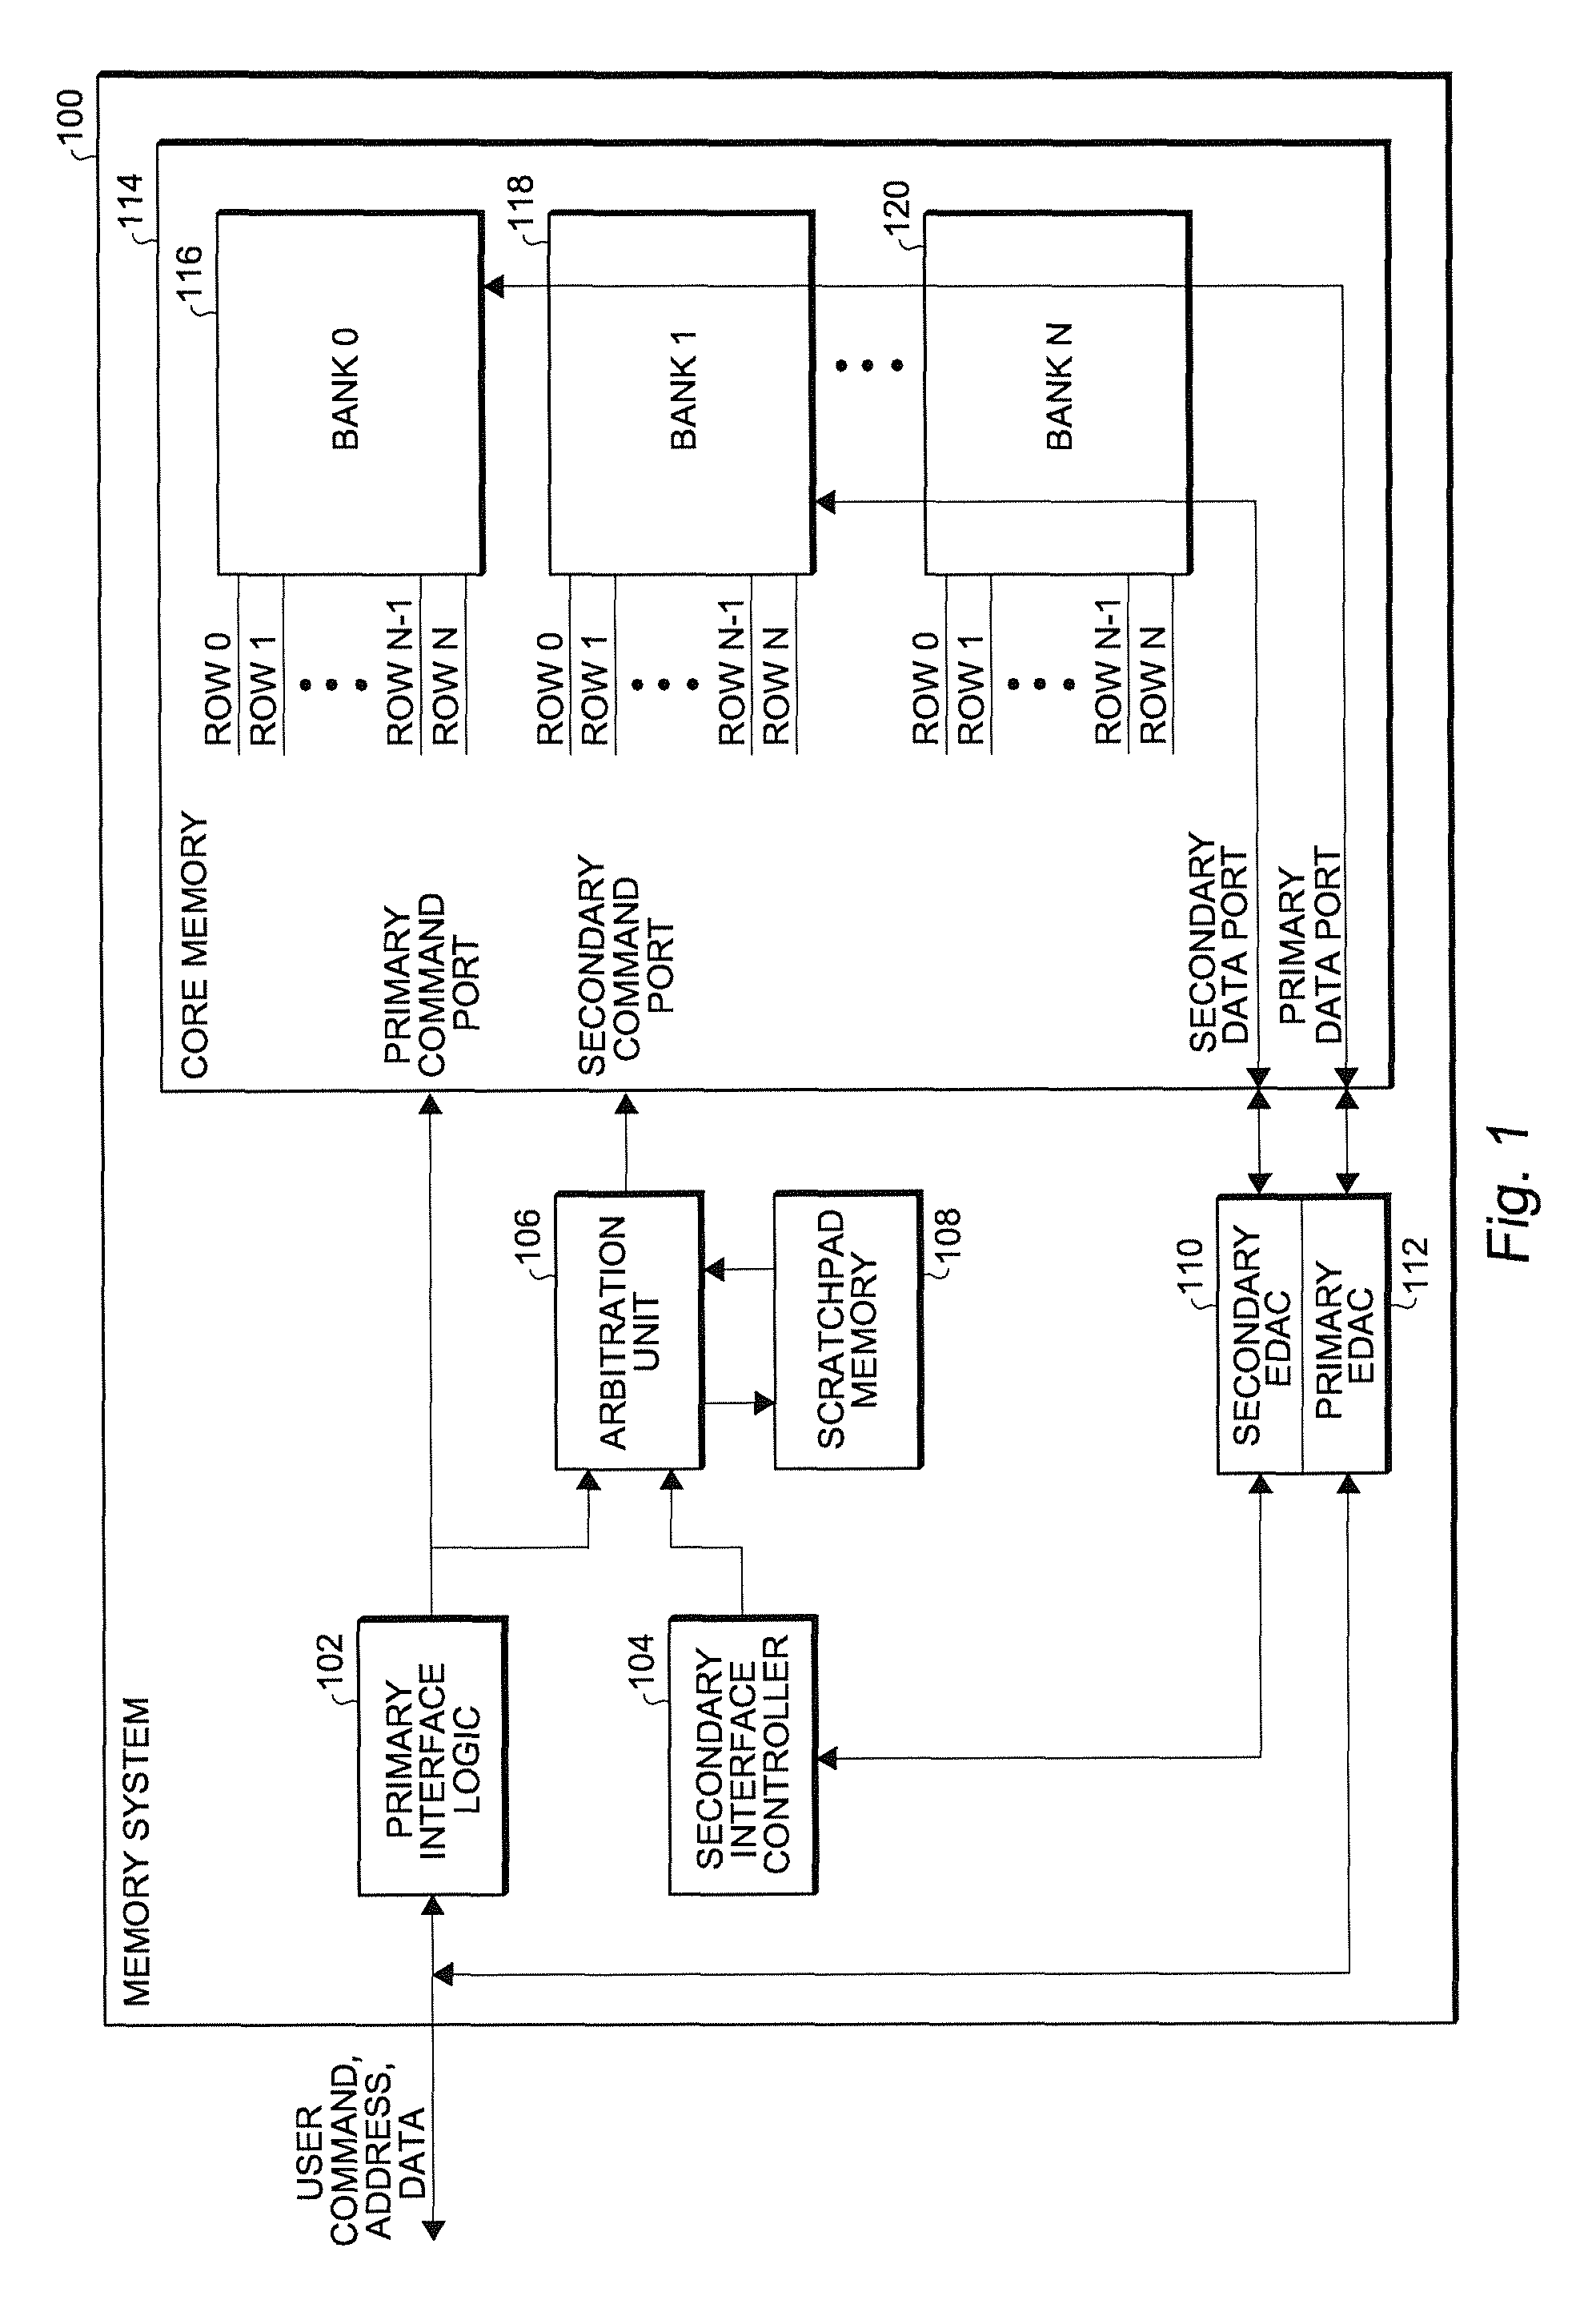 Method for concurrent system management and error detection and correction requests in integrated circuits through location aware avoidance logic